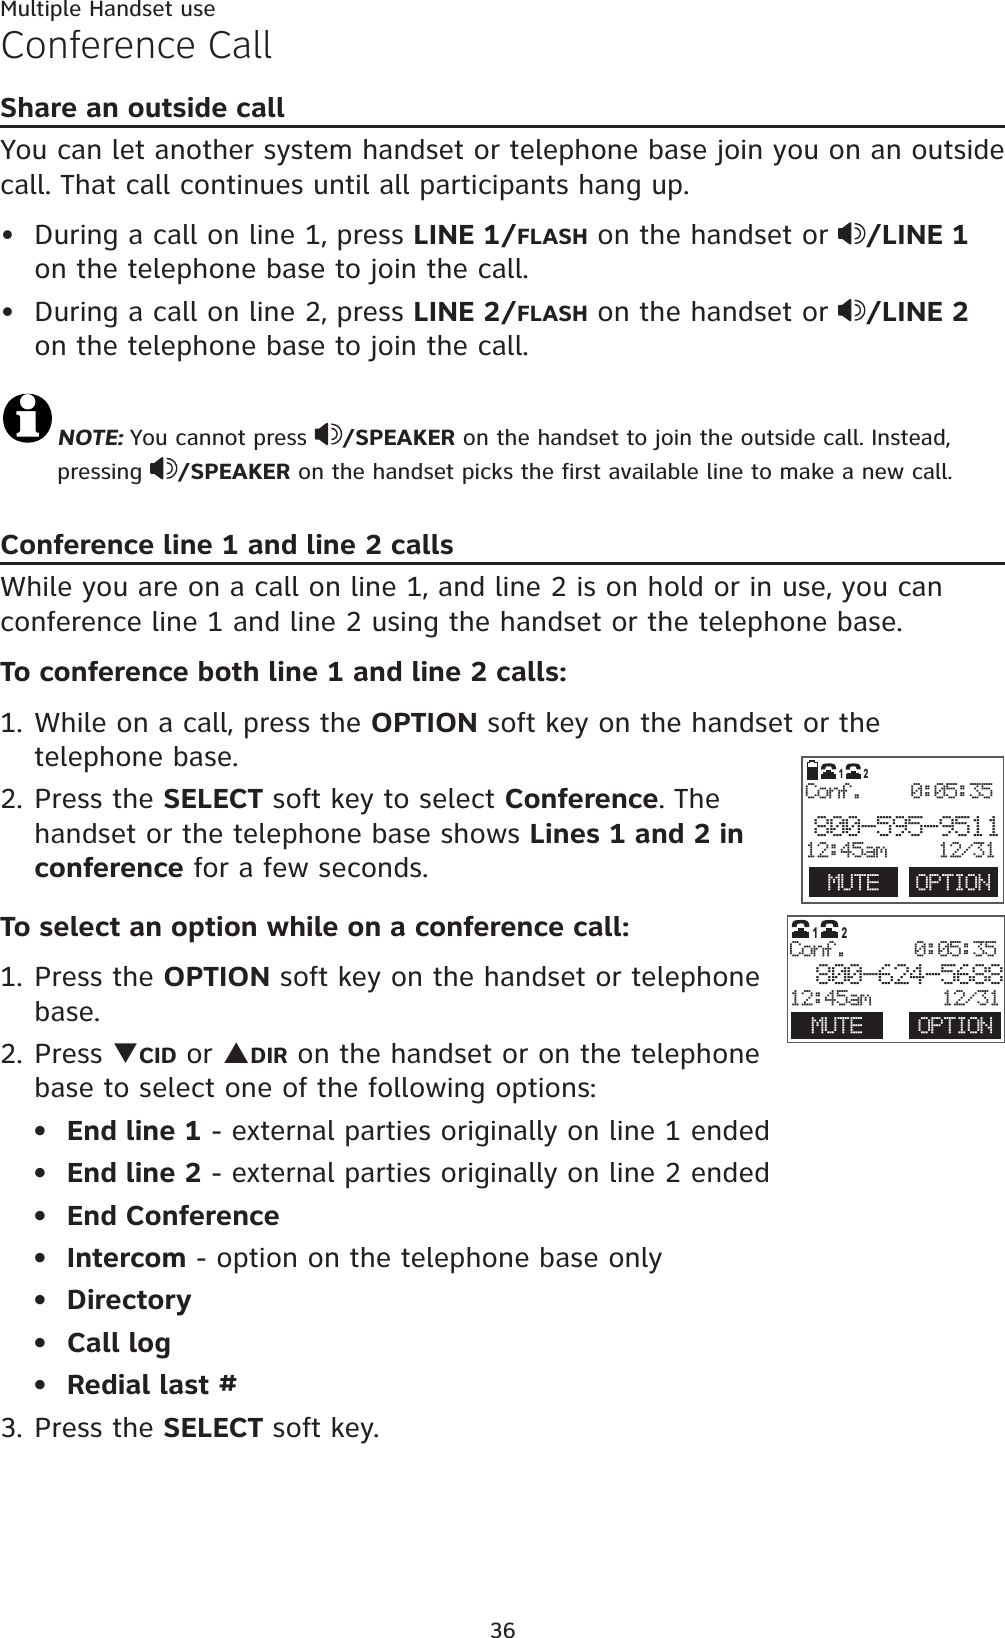 Multiple Handset use36Conference CallShare an outside callYou can let another system handset or telephone base join you on an outside call. That call continues until all participants hang up. During a call on line 1, press LINE 1/FLASH on the handset or  /LINE 1on the telephone base to join the call.During a call on line 2, press LINE 2/FLASH on the handset or  /LINE 2on the telephone base to join the call.NOTE: You cannot press  /SPEAKER on the handset to join the outside call. Instead, pressing  /SPEAKER on the handset picks the first available line to make a new call.Conference line 1 and line 2 callsWhile you are on a call on line 1, and line 2 is on hold or in use, you can conference line 1 and line 2 using the handset or the telephone base.To conference both line 1 and line 2 calls:1. While on a call, press the OPTION soft key on the handset or the telephone base.2. Press the SELECT soft key to select Conference. The handset or the telephone base shows Lines 1 and 2 in conference for a few seconds.To select an option while on a conference call:1. Press the OPTION soft key on the handset or telephone base.2. Press TCID or SDIR on the handset or on the telephone base to select one of the following options:End line 1 - external parties originally on line 1 endedEnd line 2 - external parties originally on line 2 endedEnd ConferenceIntercom - option on the telephone base onlyDirectoryCall logRedial last #3. Press the SELECT soft key.•••••••••  MUTE  OPTIONConf.    0:05:35800-595-951112:45am 12/3112                       Conf. 0:05:35 800-624-568812:45am      12/31MUTE OPTION12